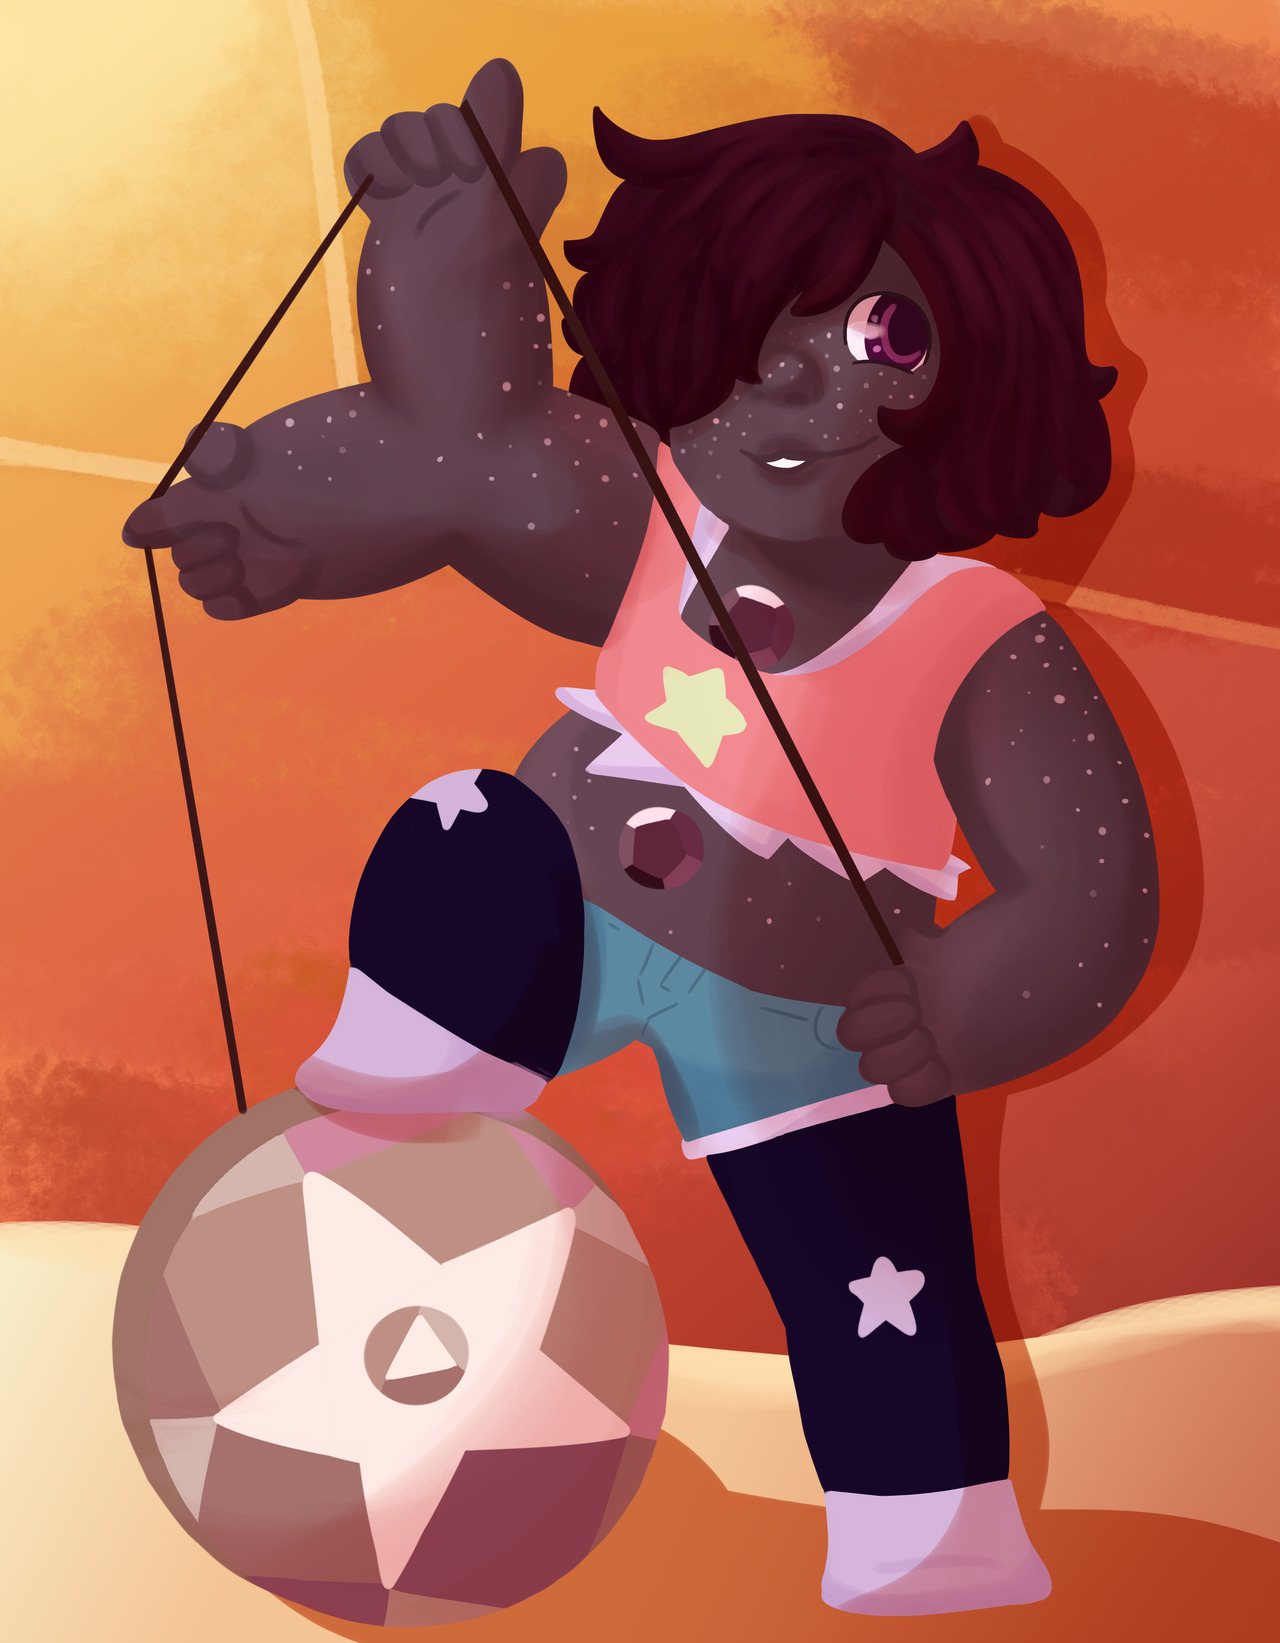 Here’s a little smokey quartz to celebrate the new episodes coming out soon!